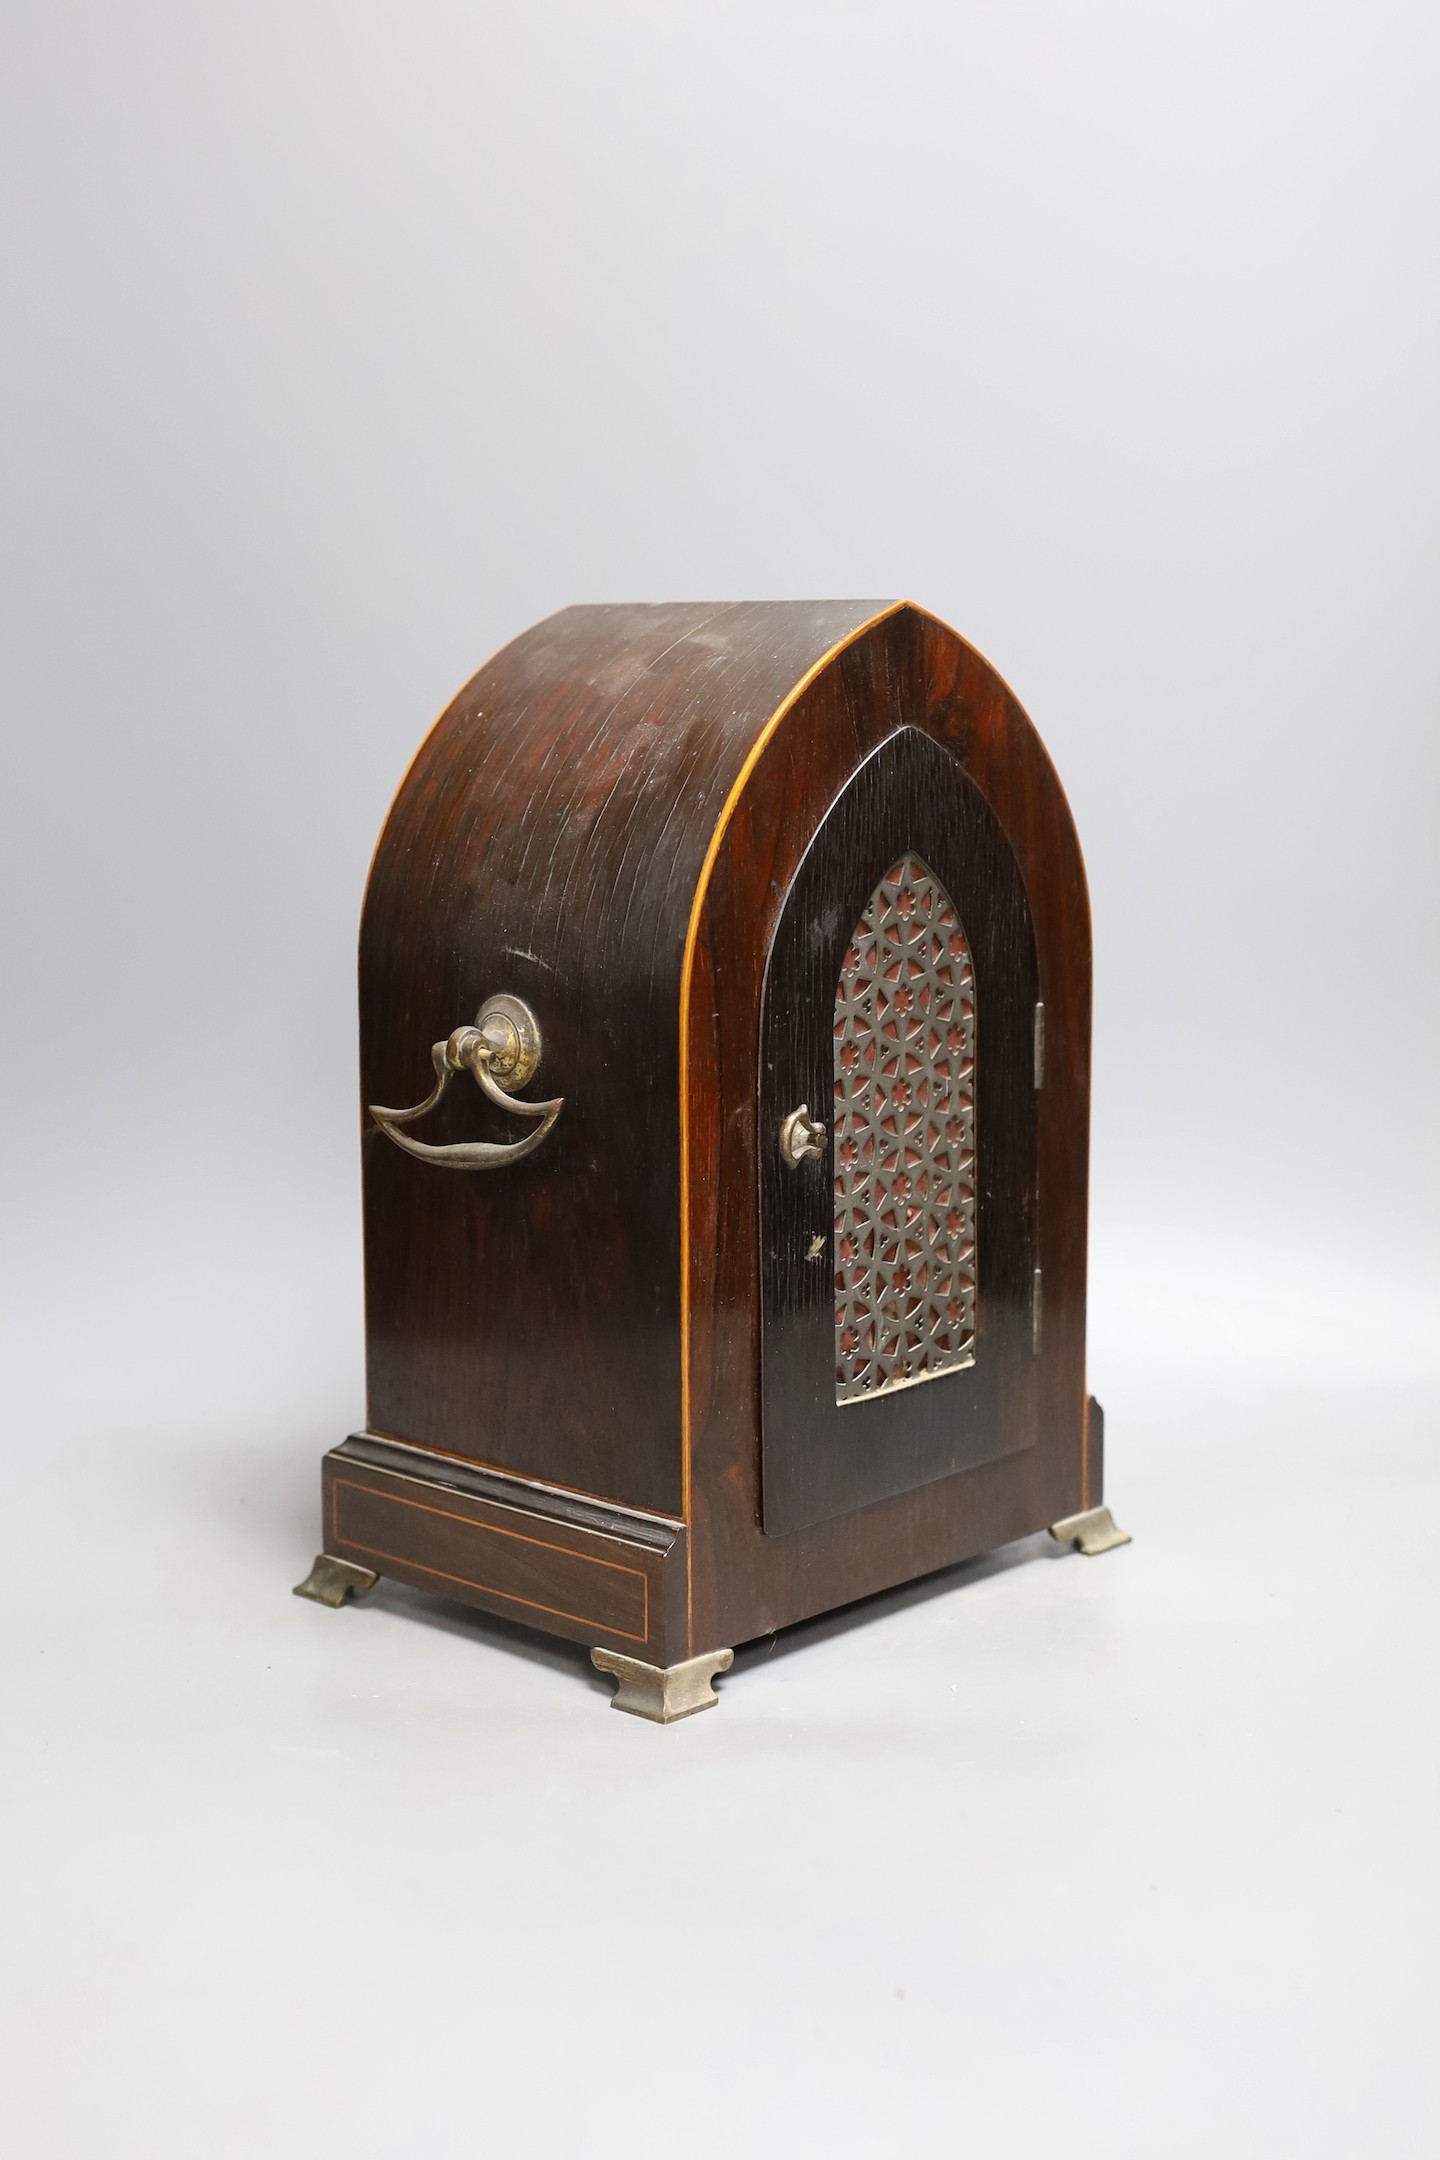 An early 20th century mahogany inlaid dome topped mantel clock, 30 cms high.